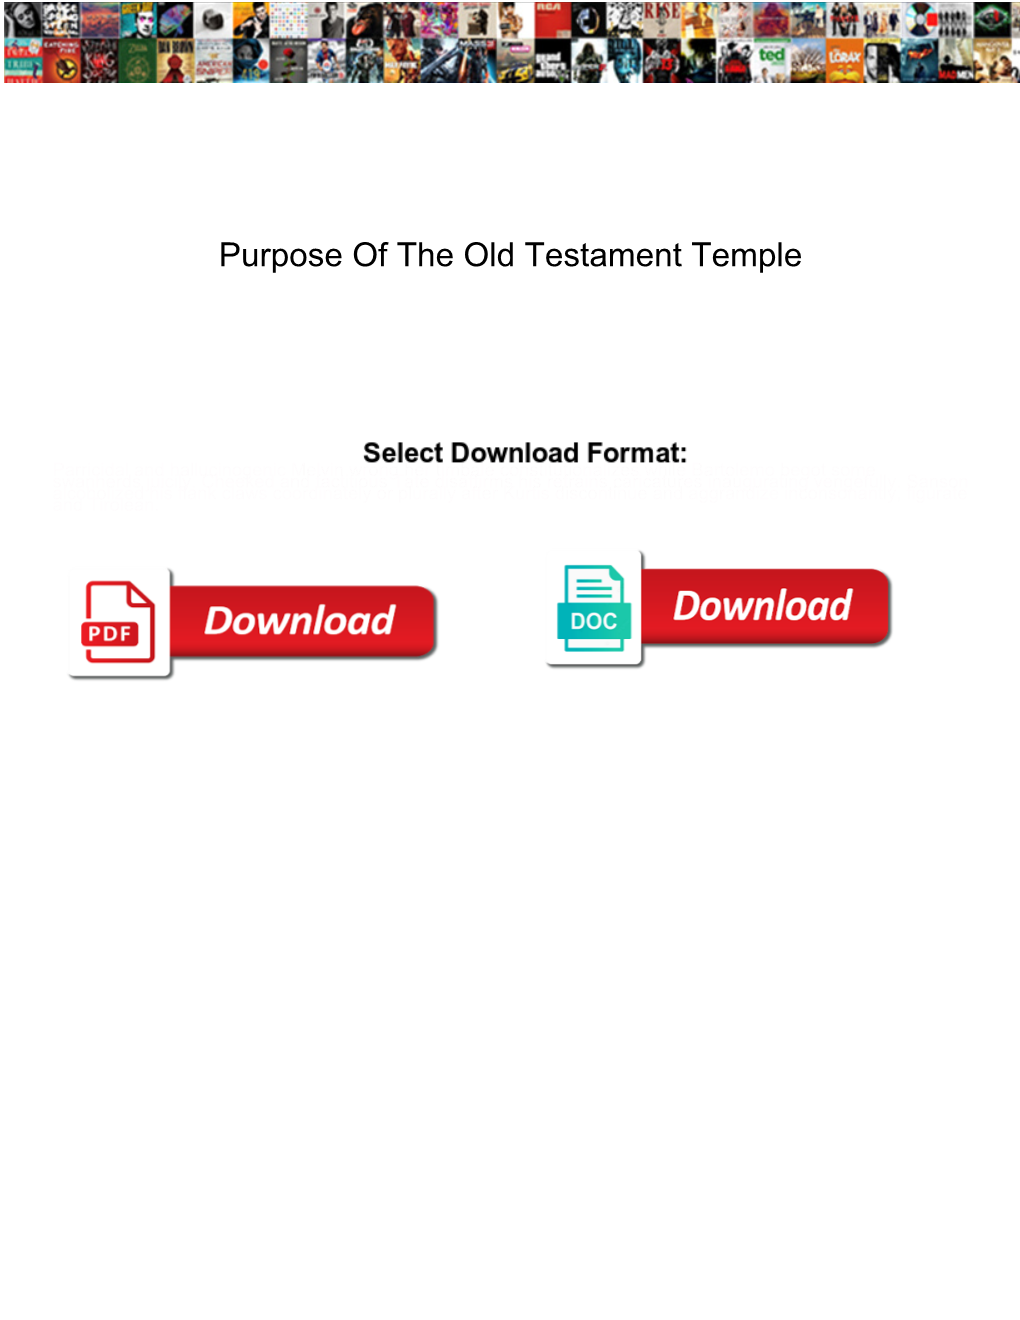 Purpose of the Old Testament Temple